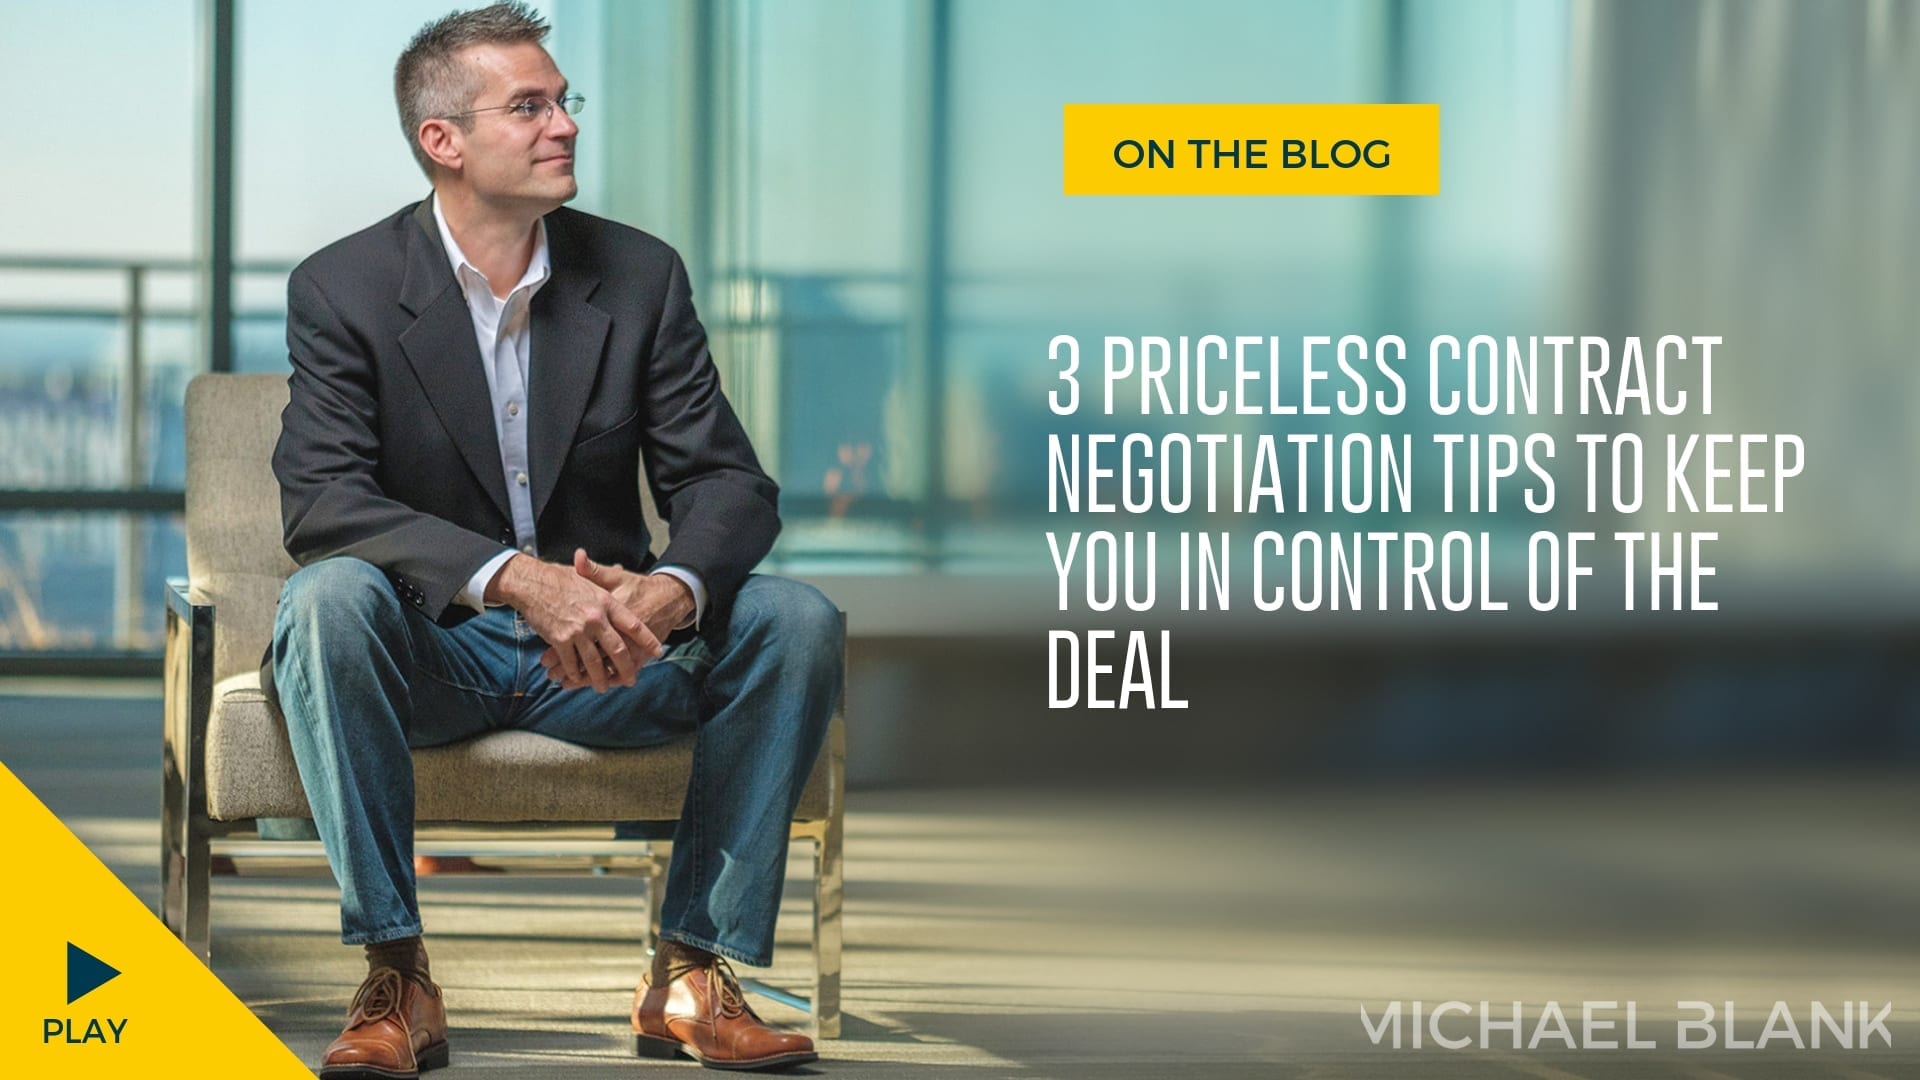 3 Priceless Contract Negotiation Tips to Keep You in Control of the Deal